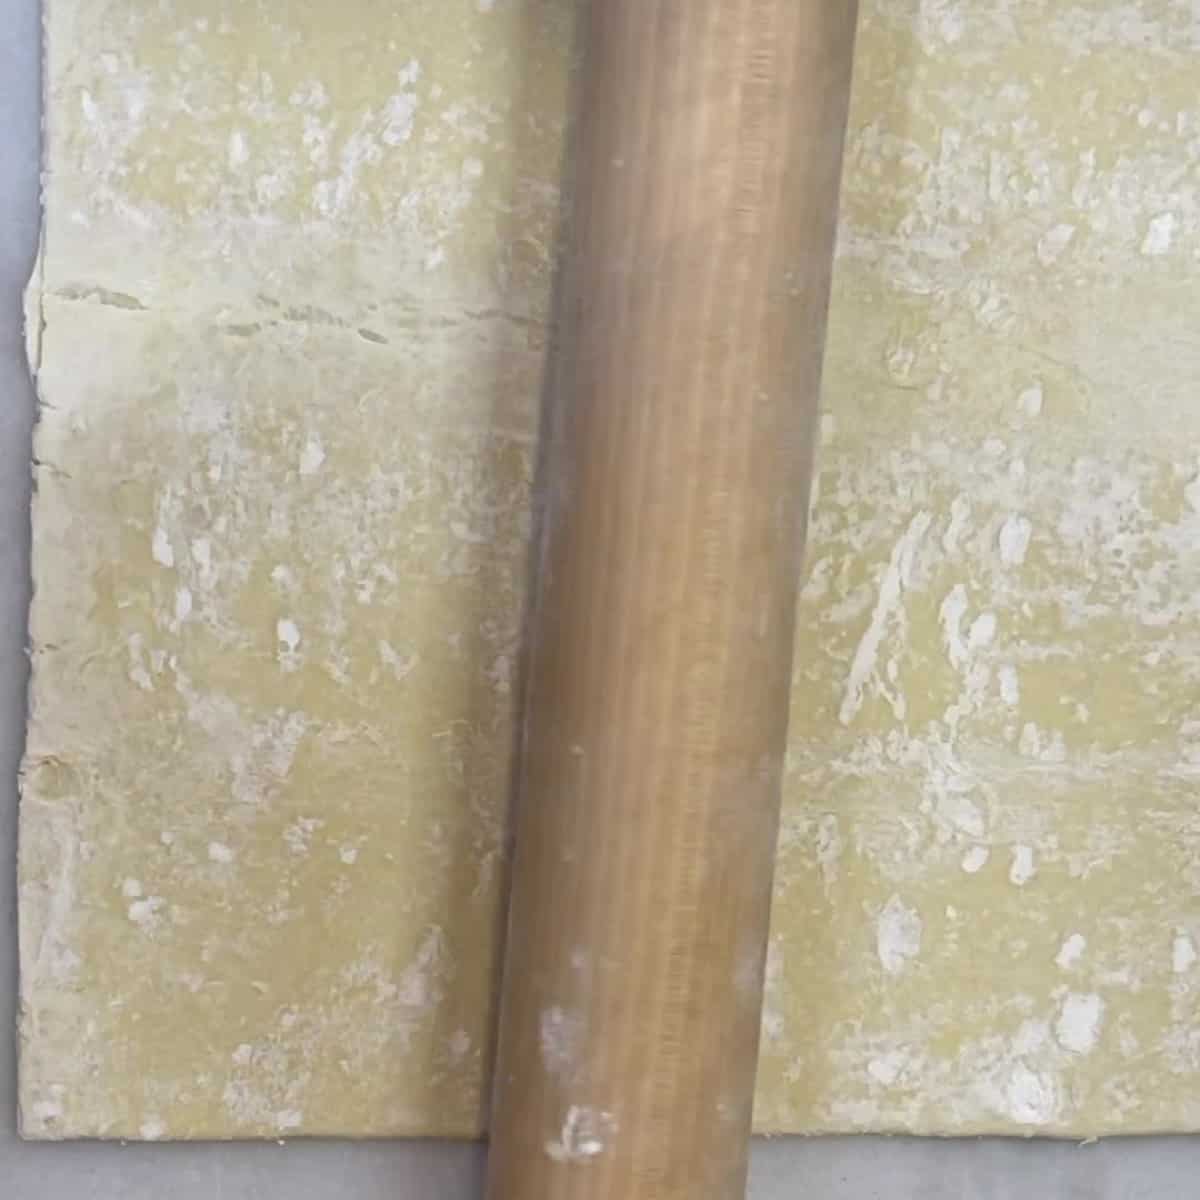 A wooden rolling pin on top of a puff pastry sheet.